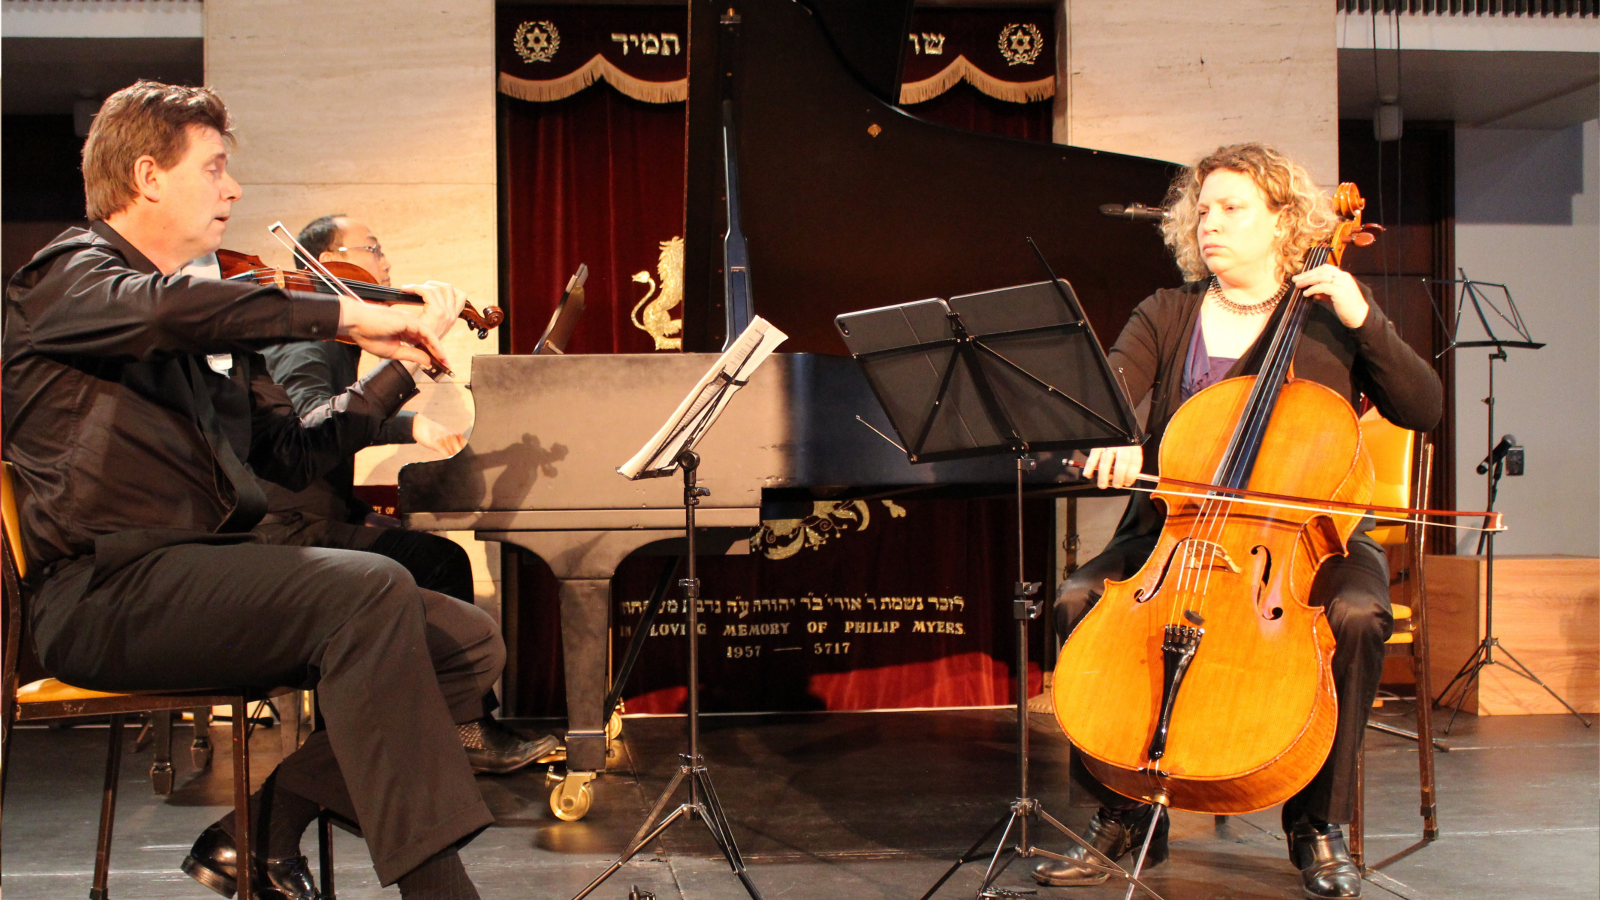 A man plays a violin and a woman plays a cello in the foreground with two music stands between them. Tucked in behind the violinist is a man playing a grand piano.